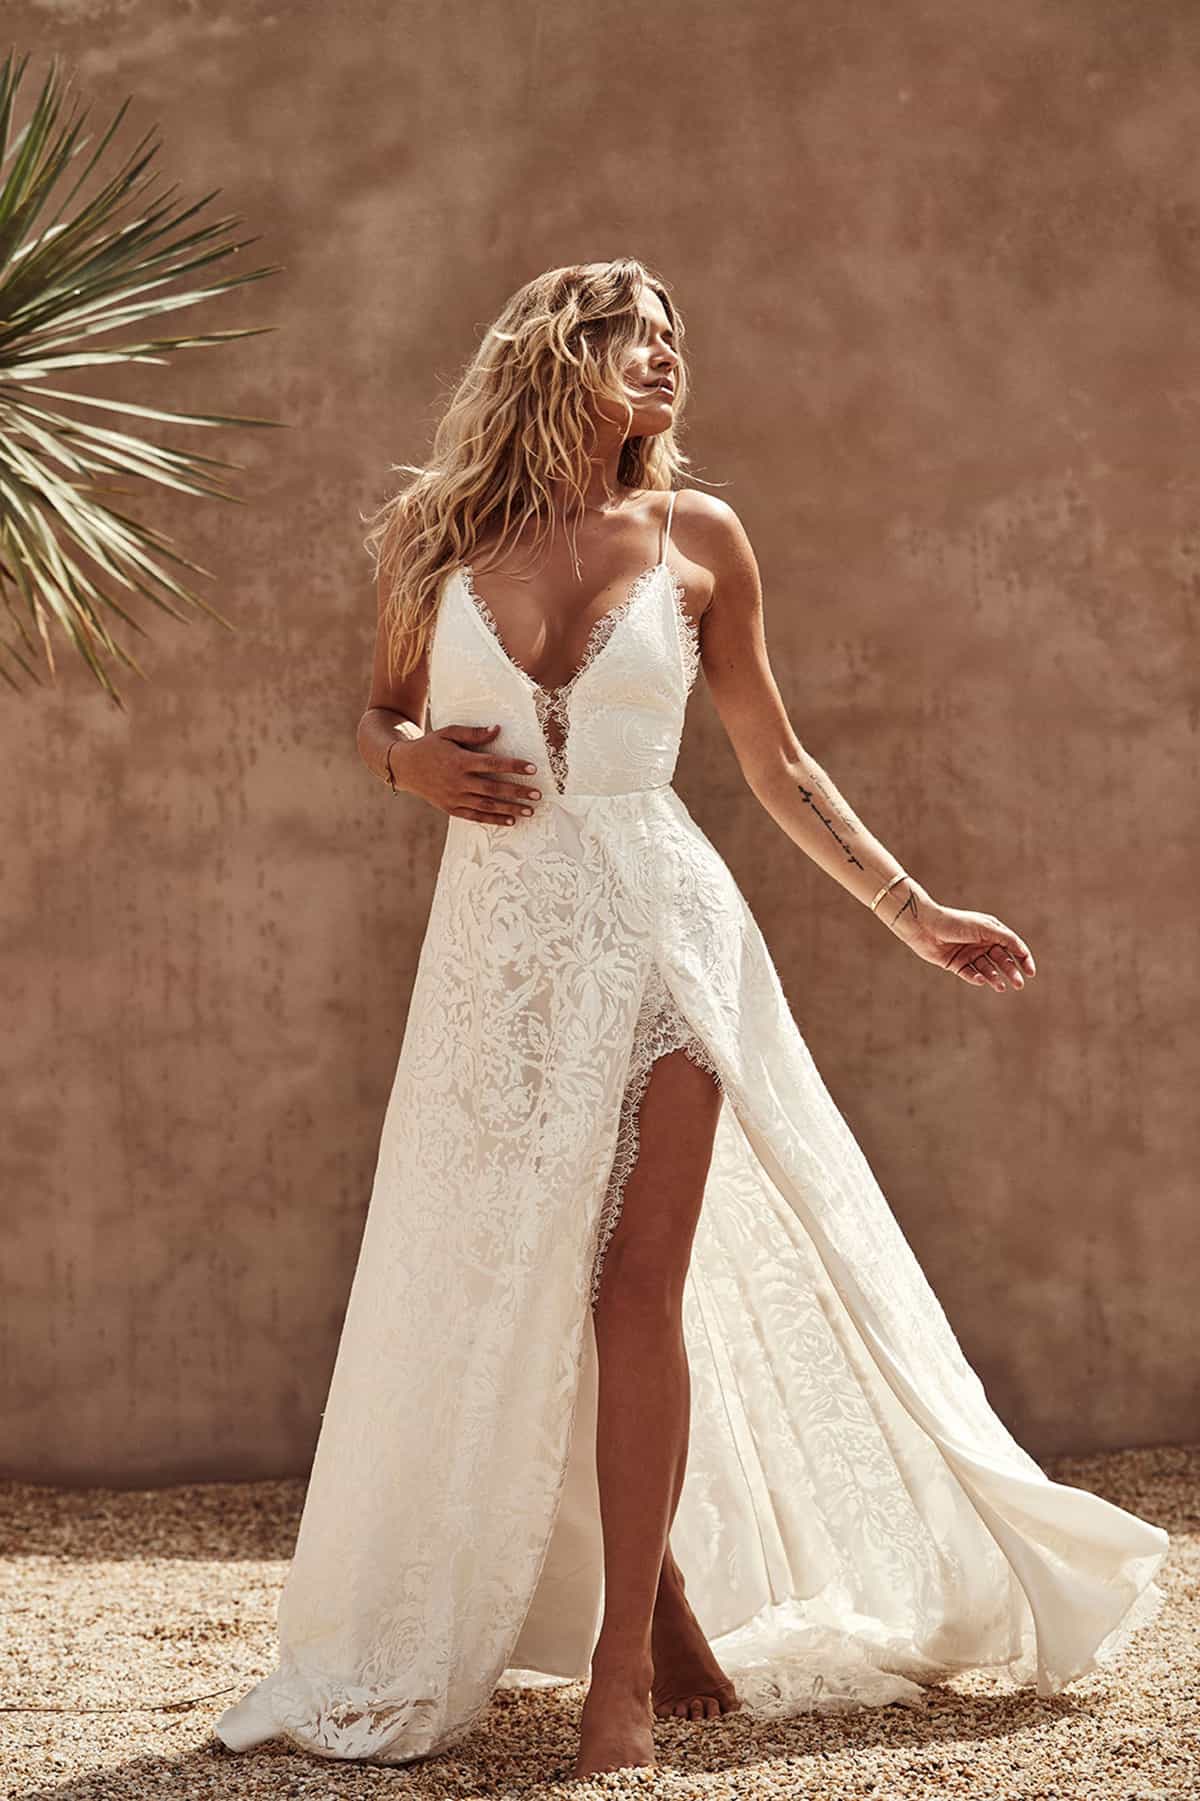 Darling-Gown-Grace-Loves-Lace-La-Bamba-Collection-3-Low-Res